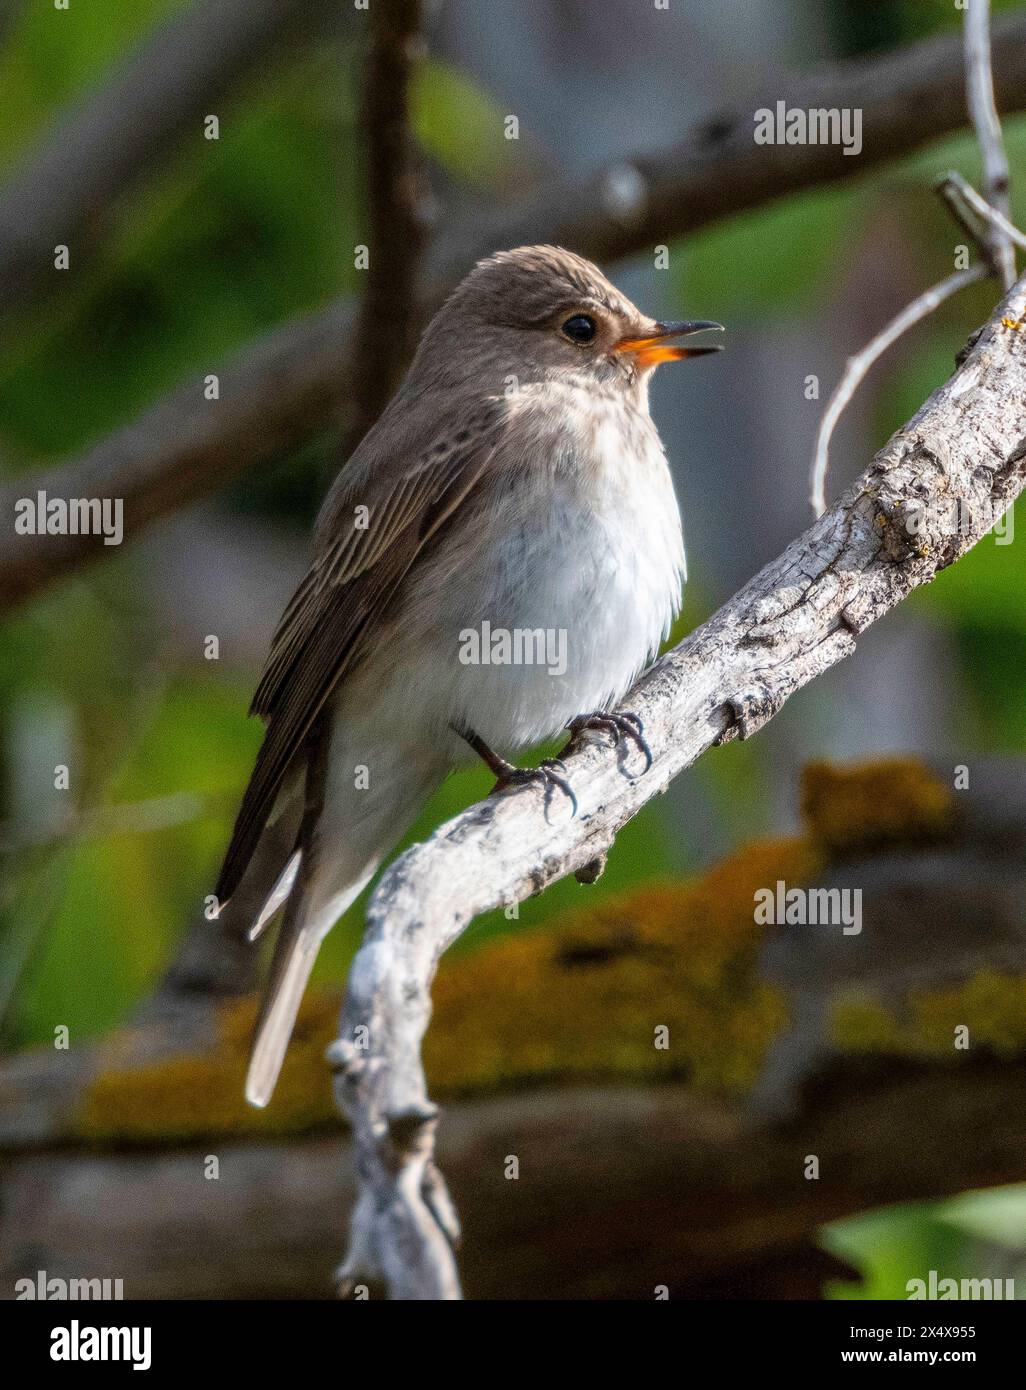 Spotted Flycatcher (Muscicapa striata) perched on a branch, Akrotiri, Cyprus Stock Photo